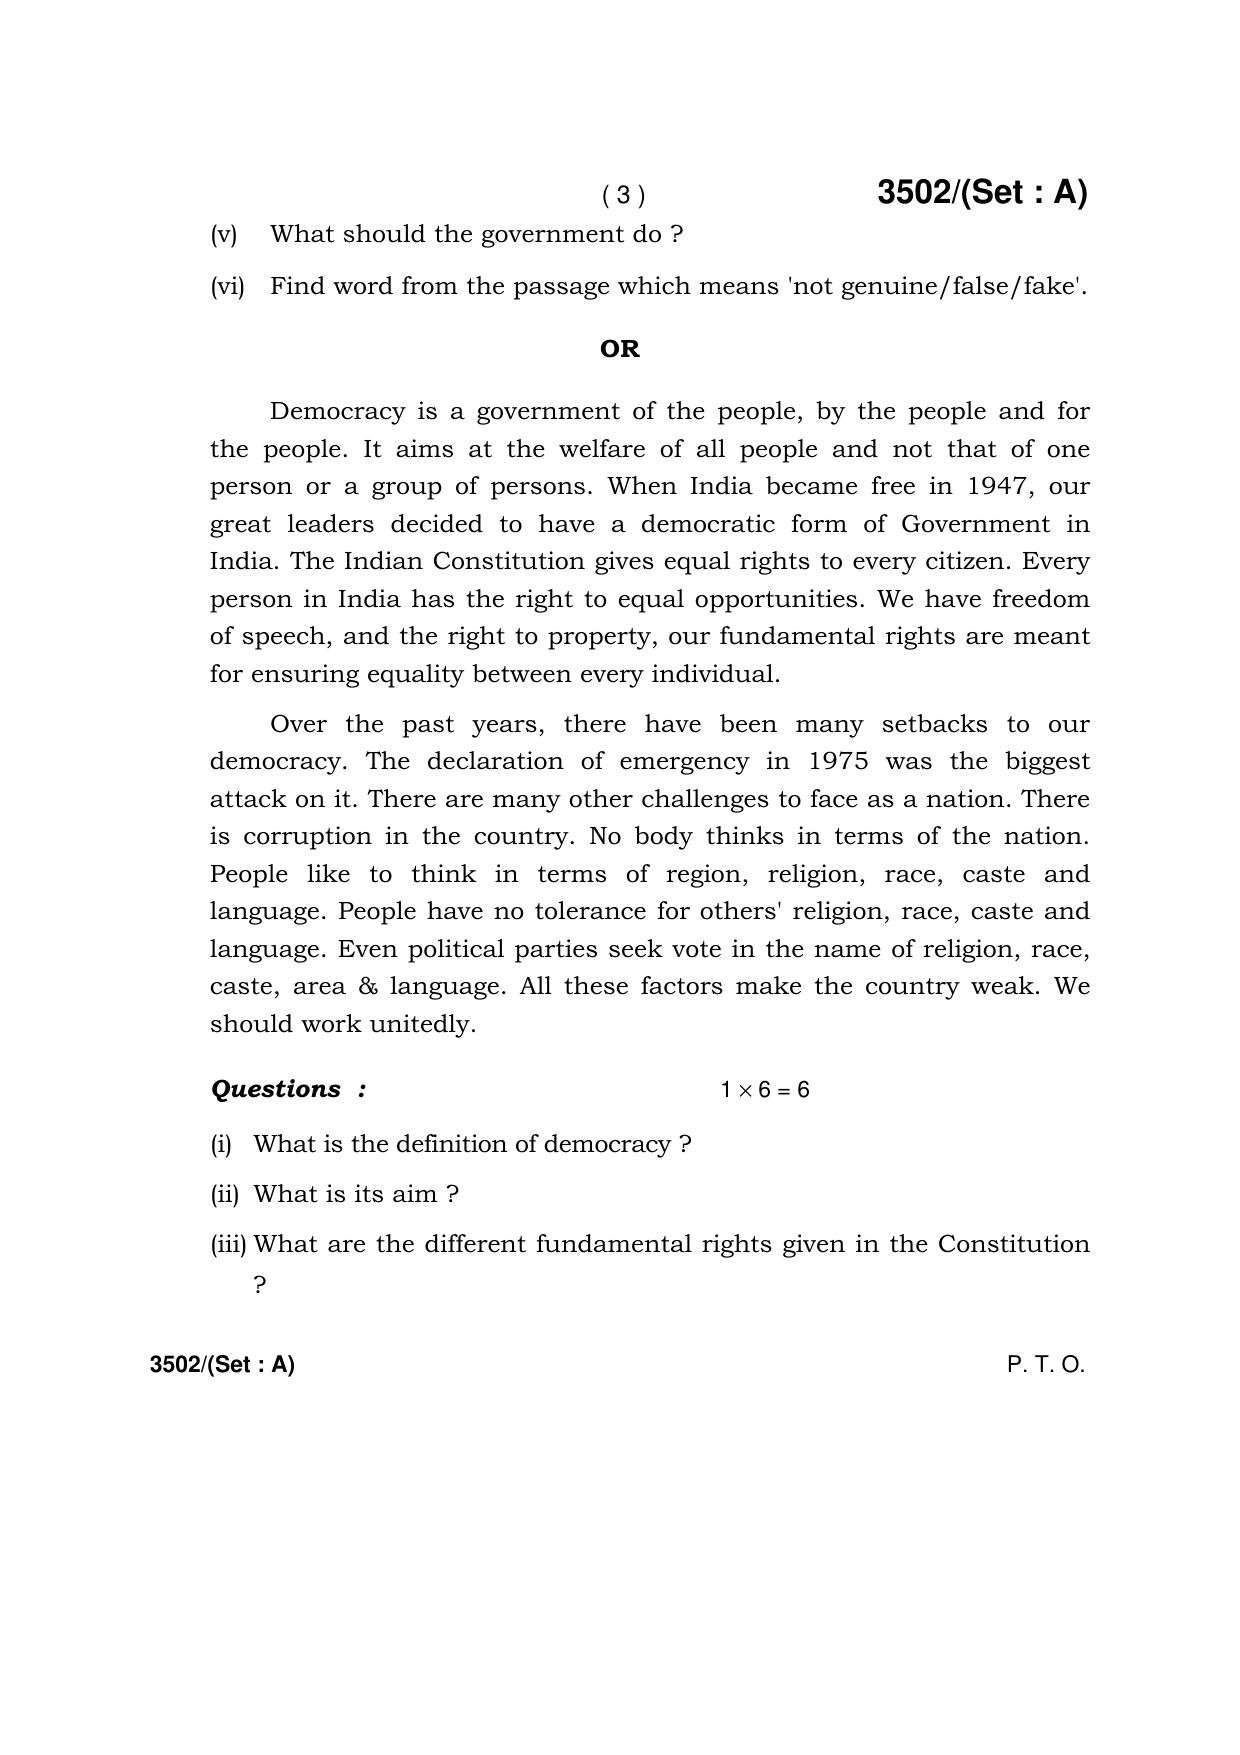 Haryana Board HBSE Class 10 English -A 2018 Question Paper - Page 3